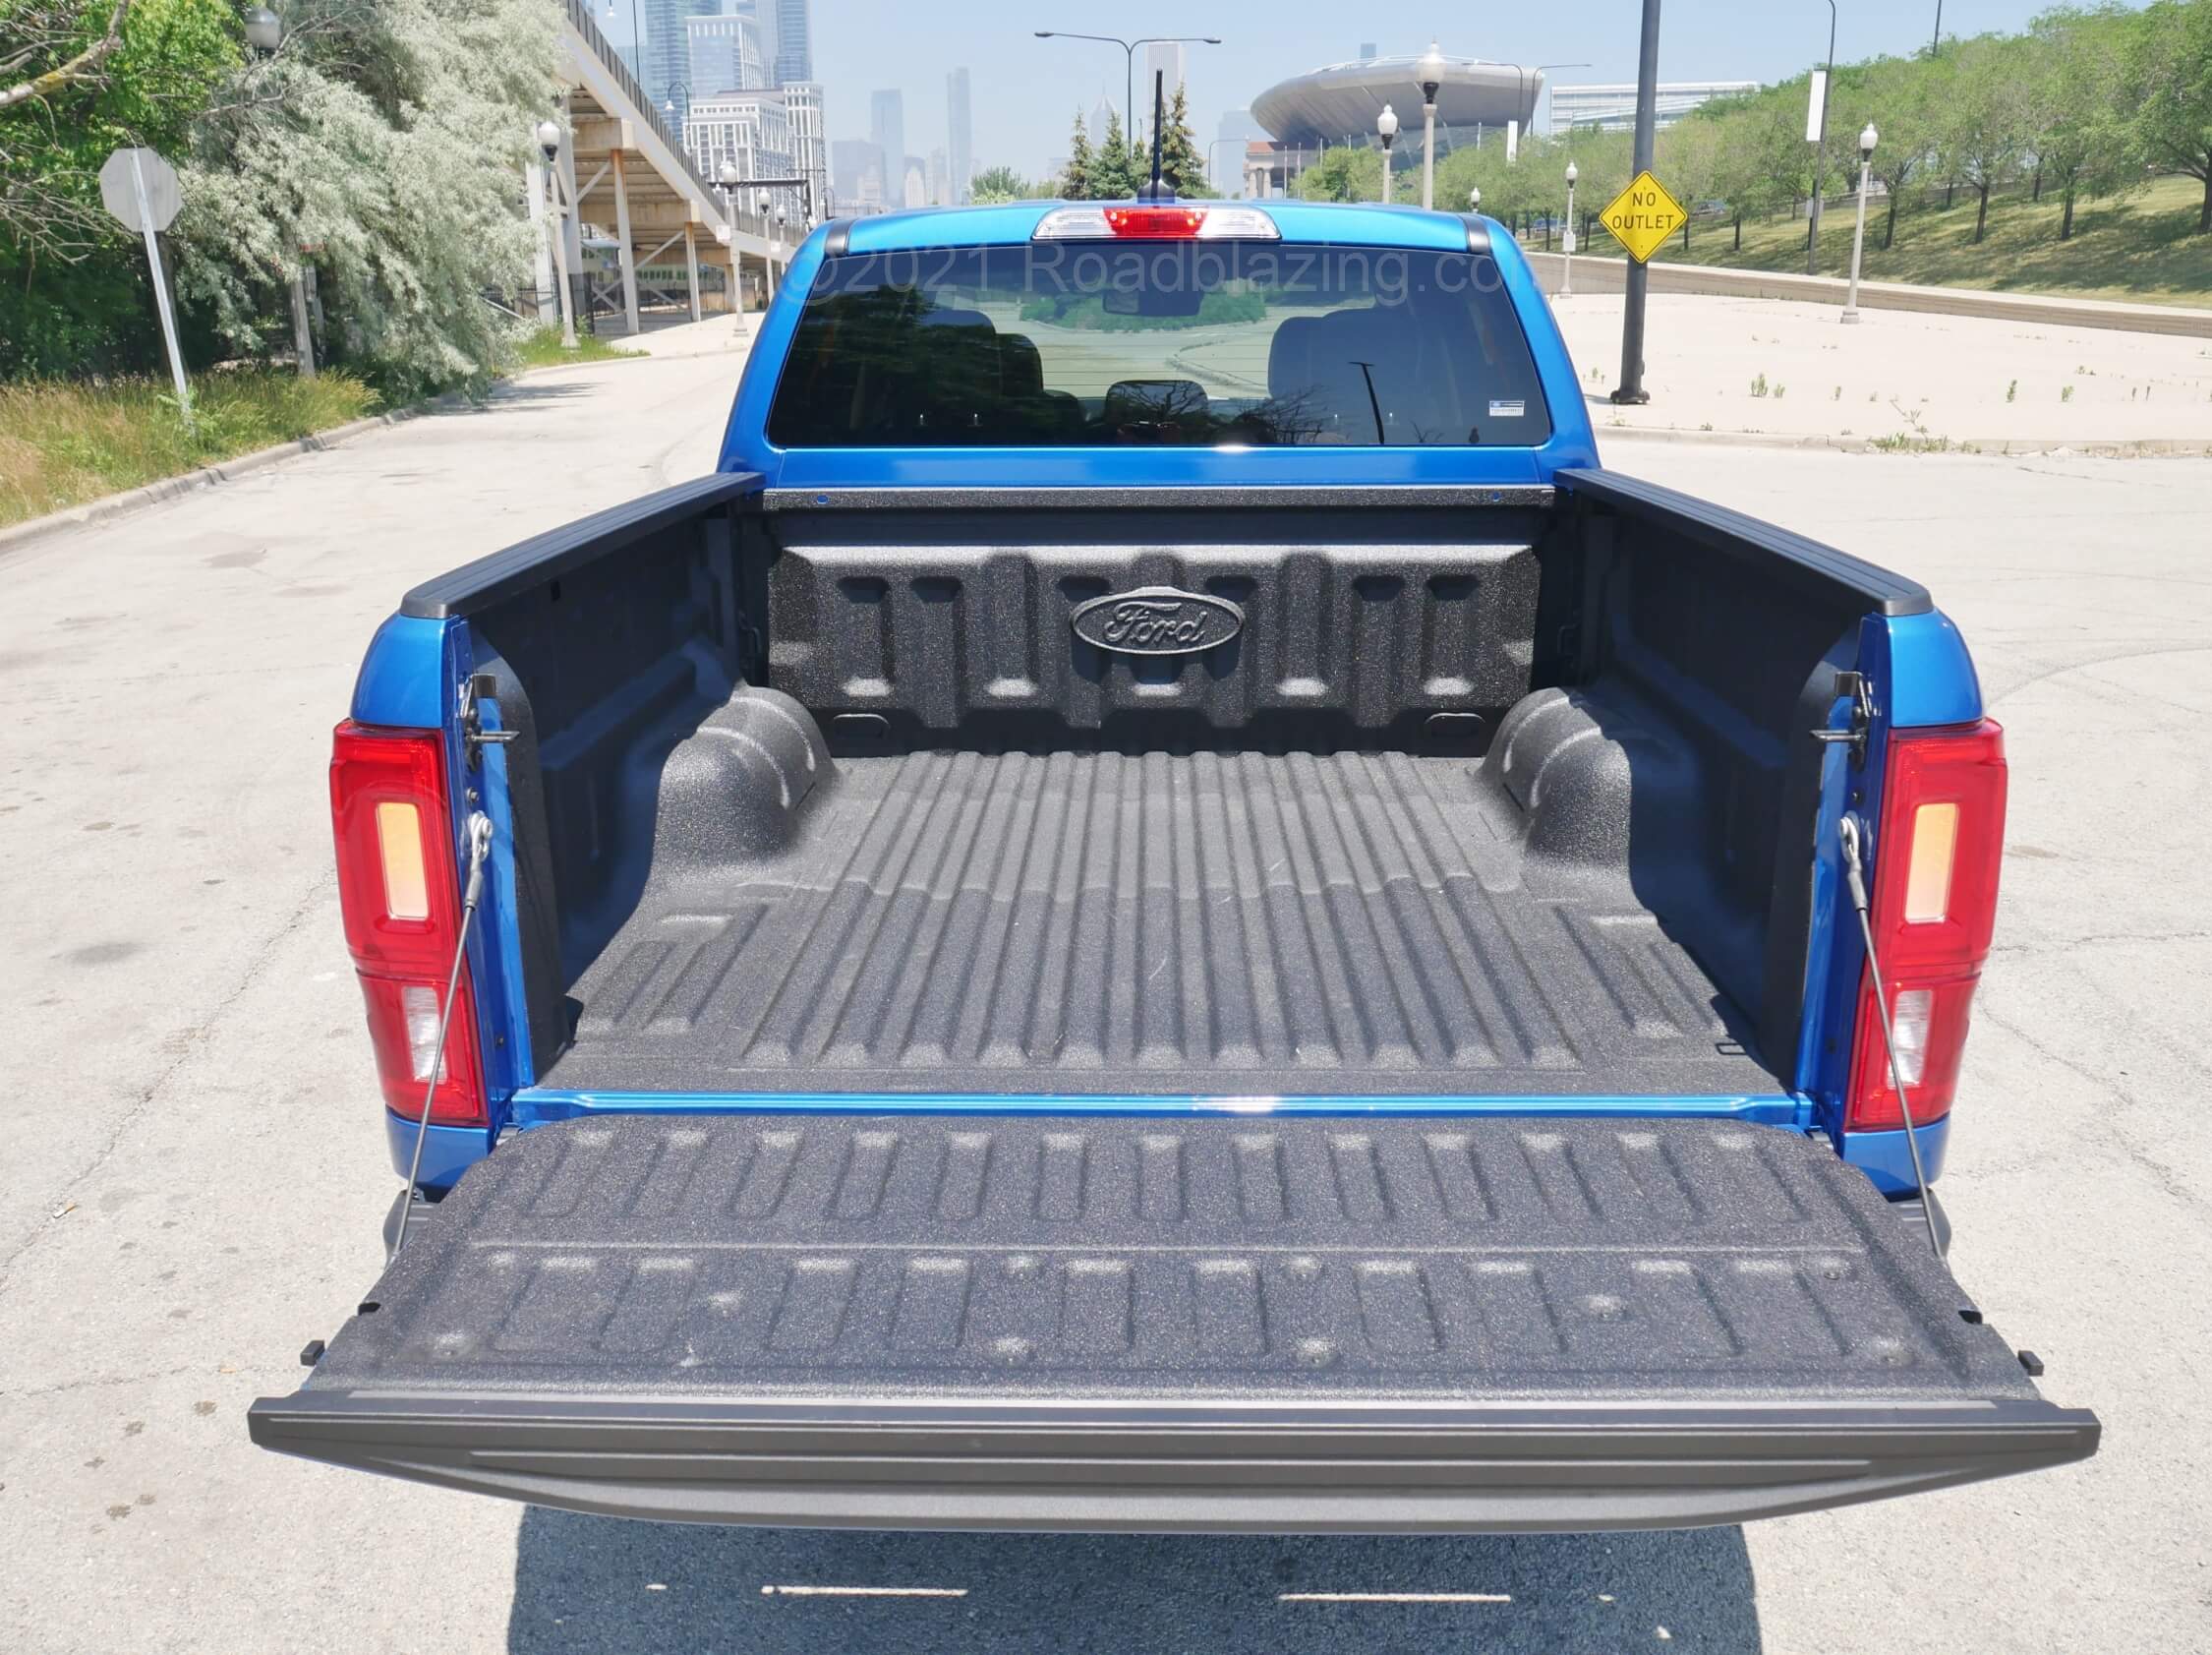 2021 Ford Ranger SuperCrew XLT Tremor 4x4: bed w/ factory spray-in lining